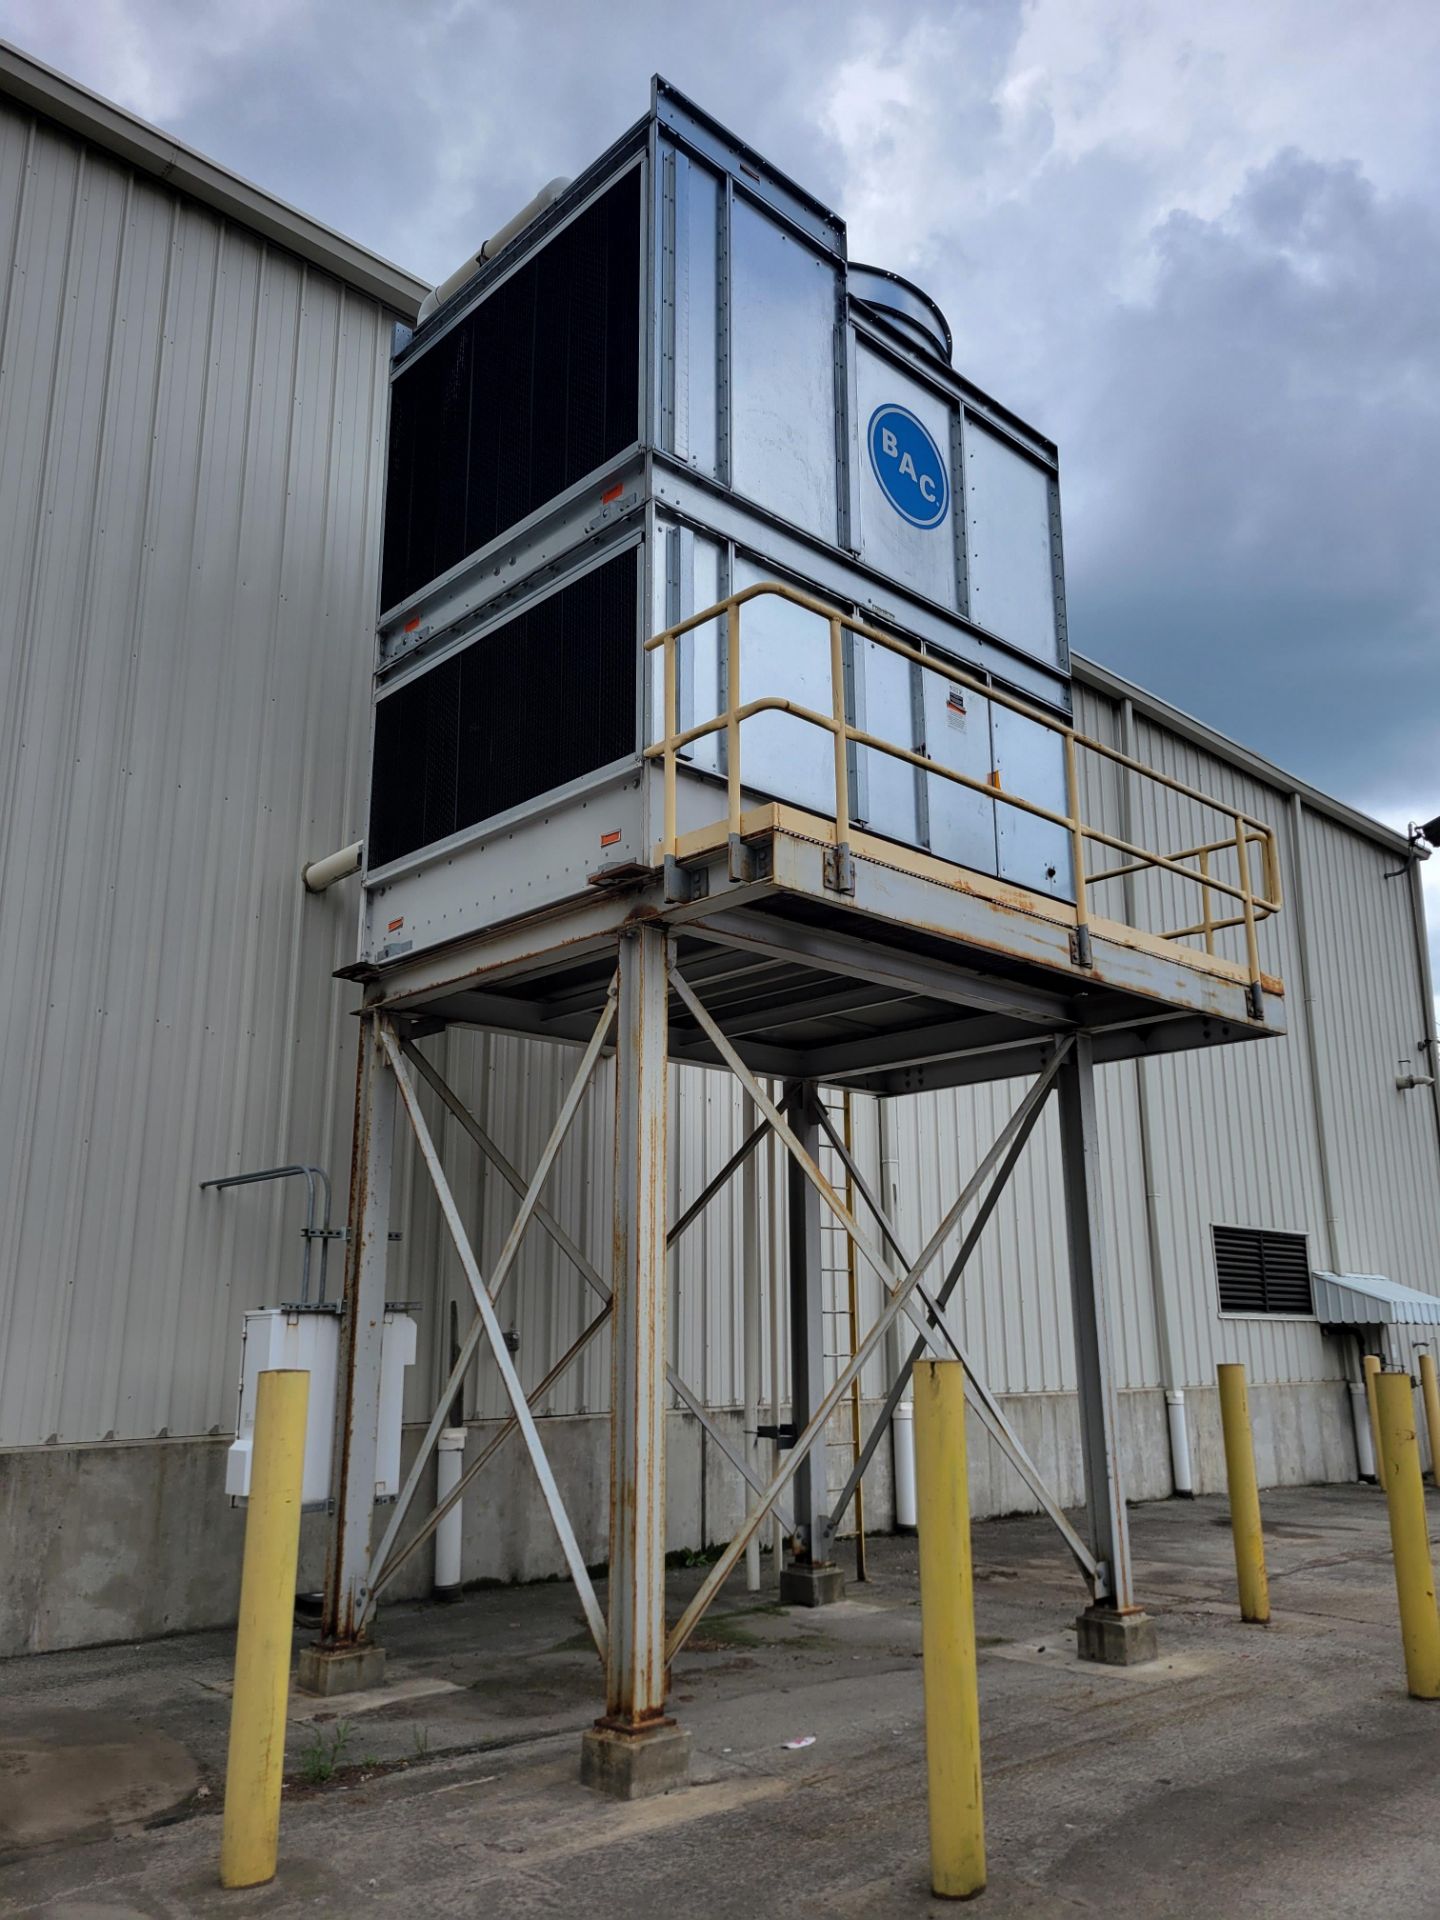 BAC Cooling Tower - Image 2 of 6